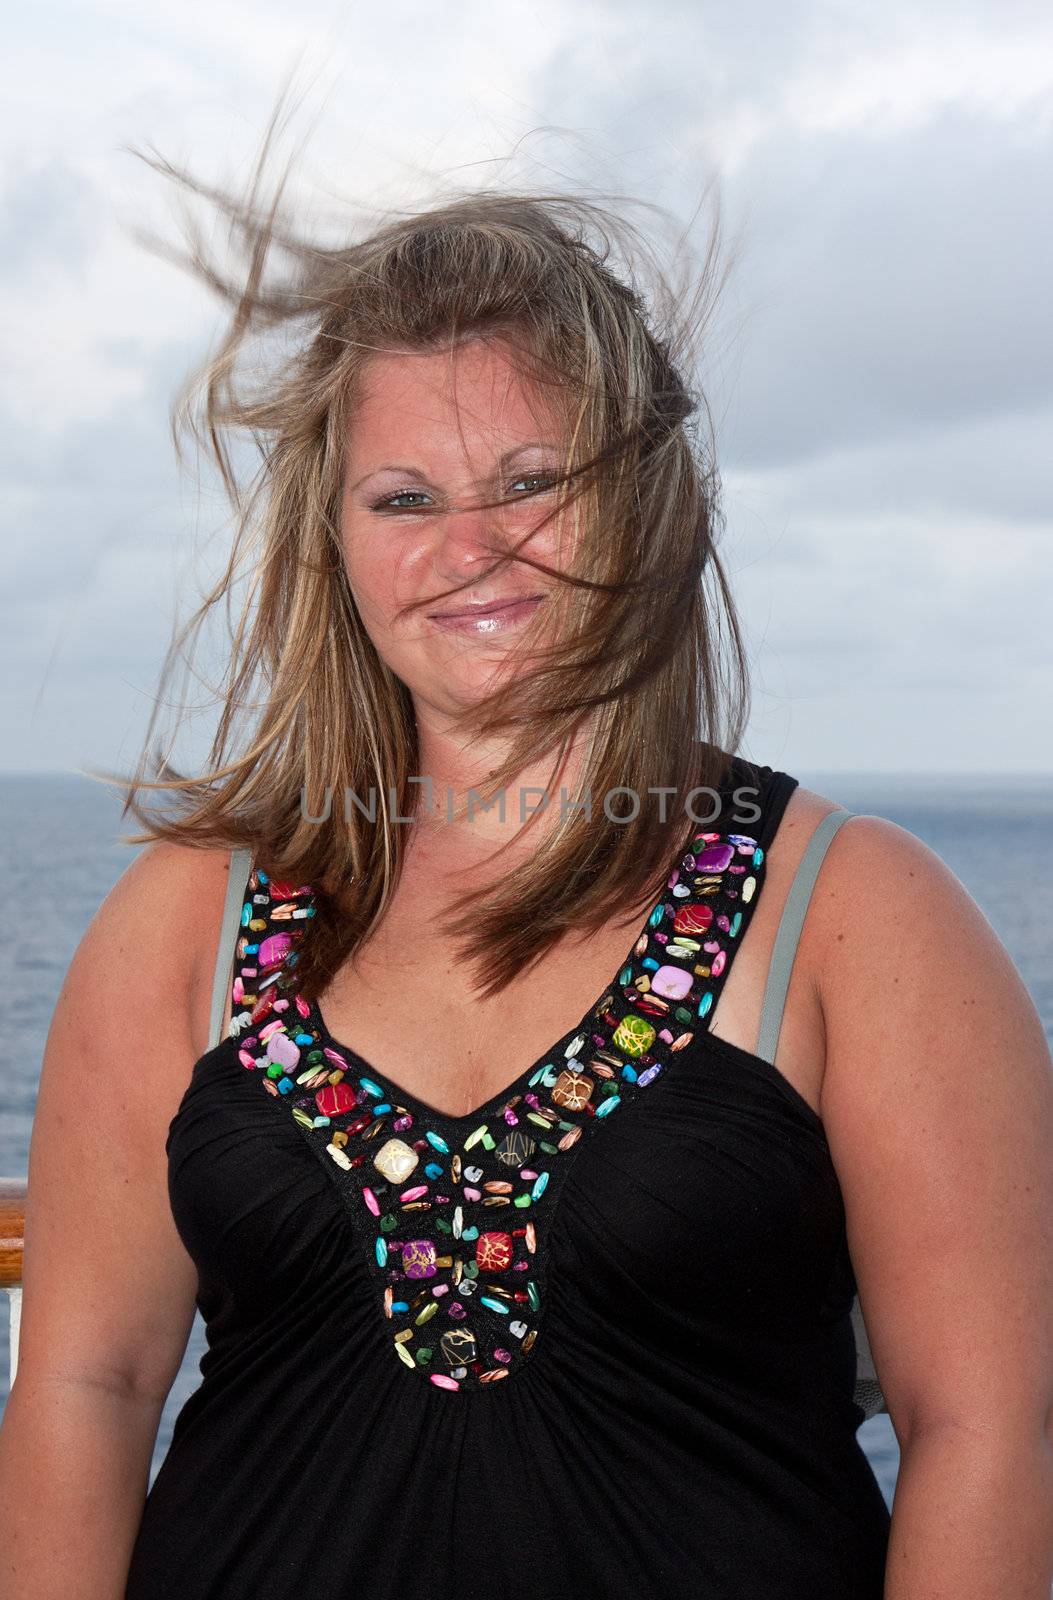 Portrait of a young woman on a cruise ship with hair blowing in the wind